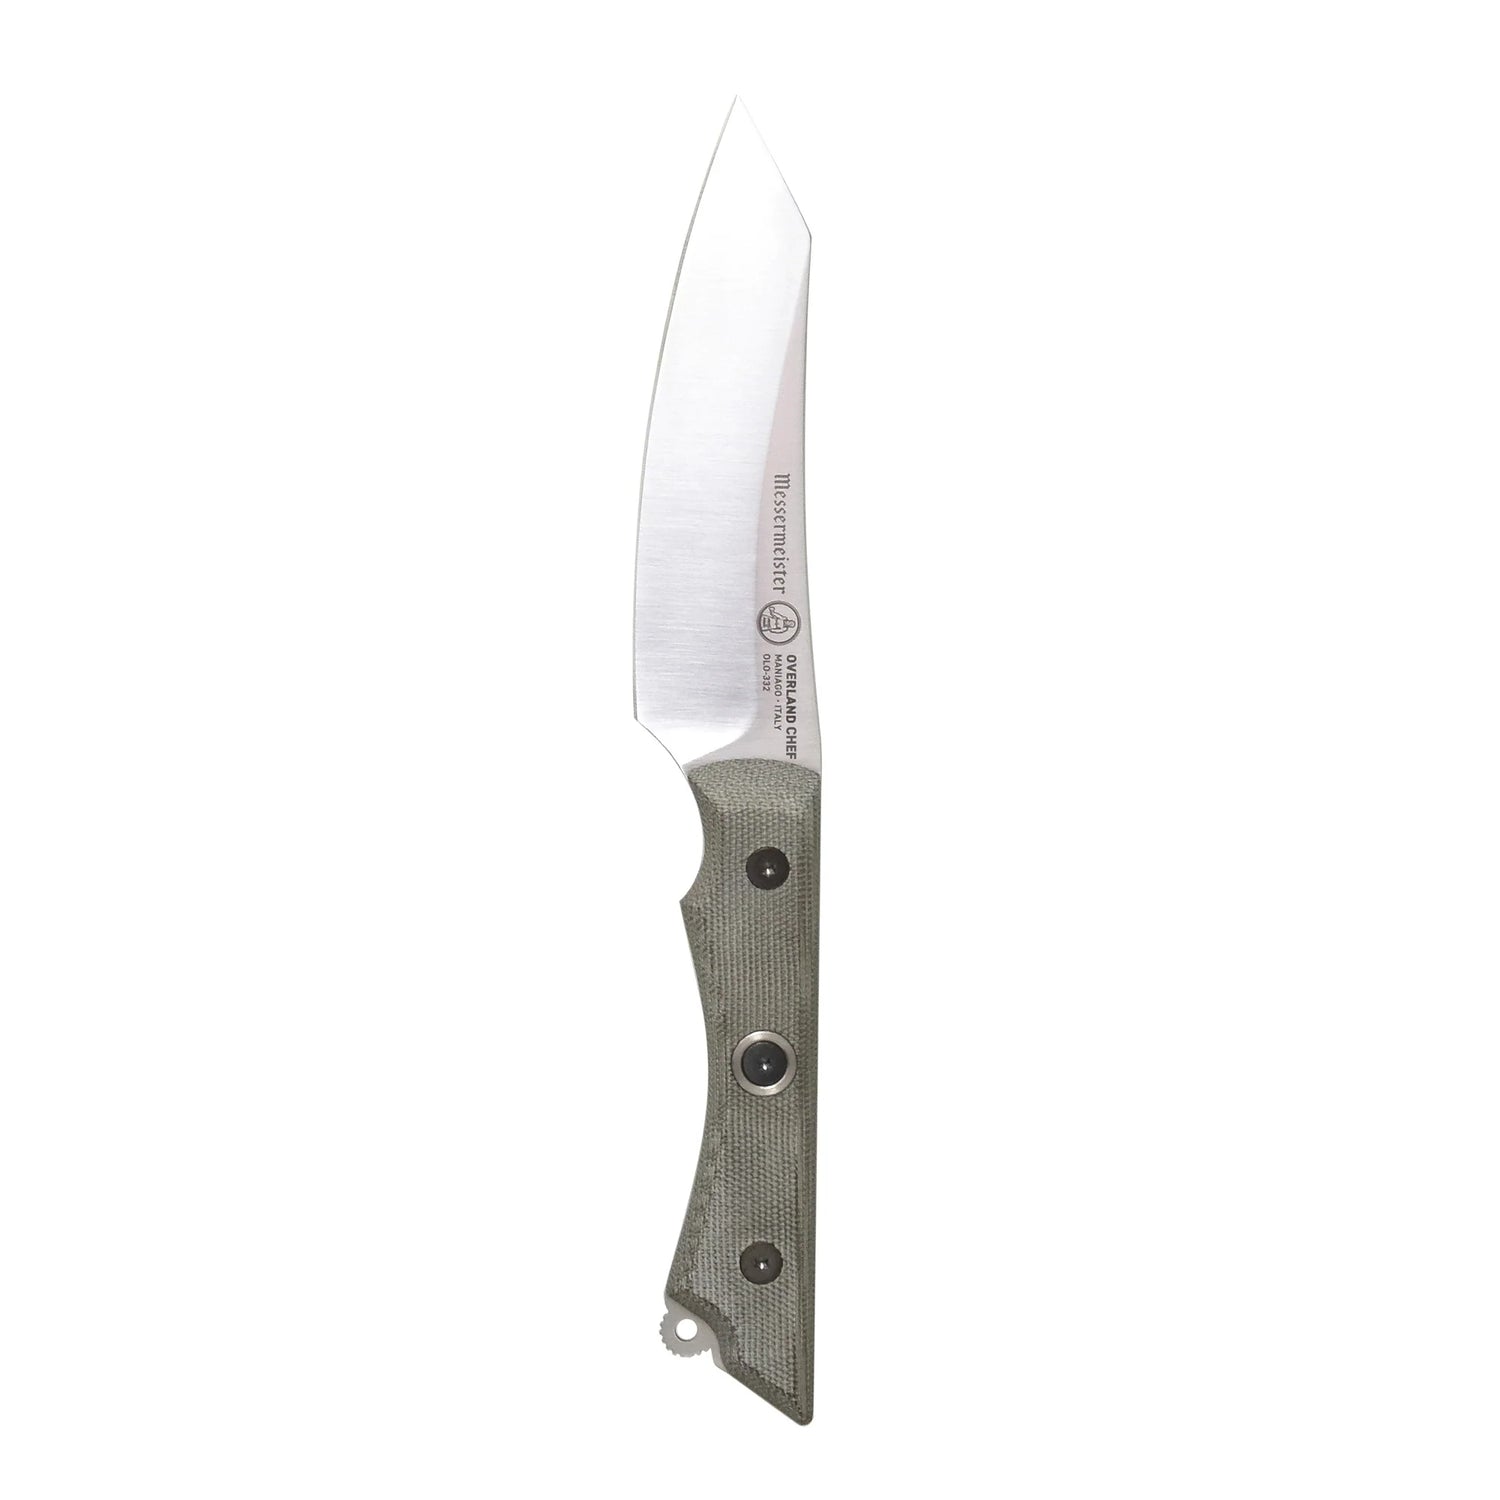 Overland Chef 4.5 Inch Utility Knife